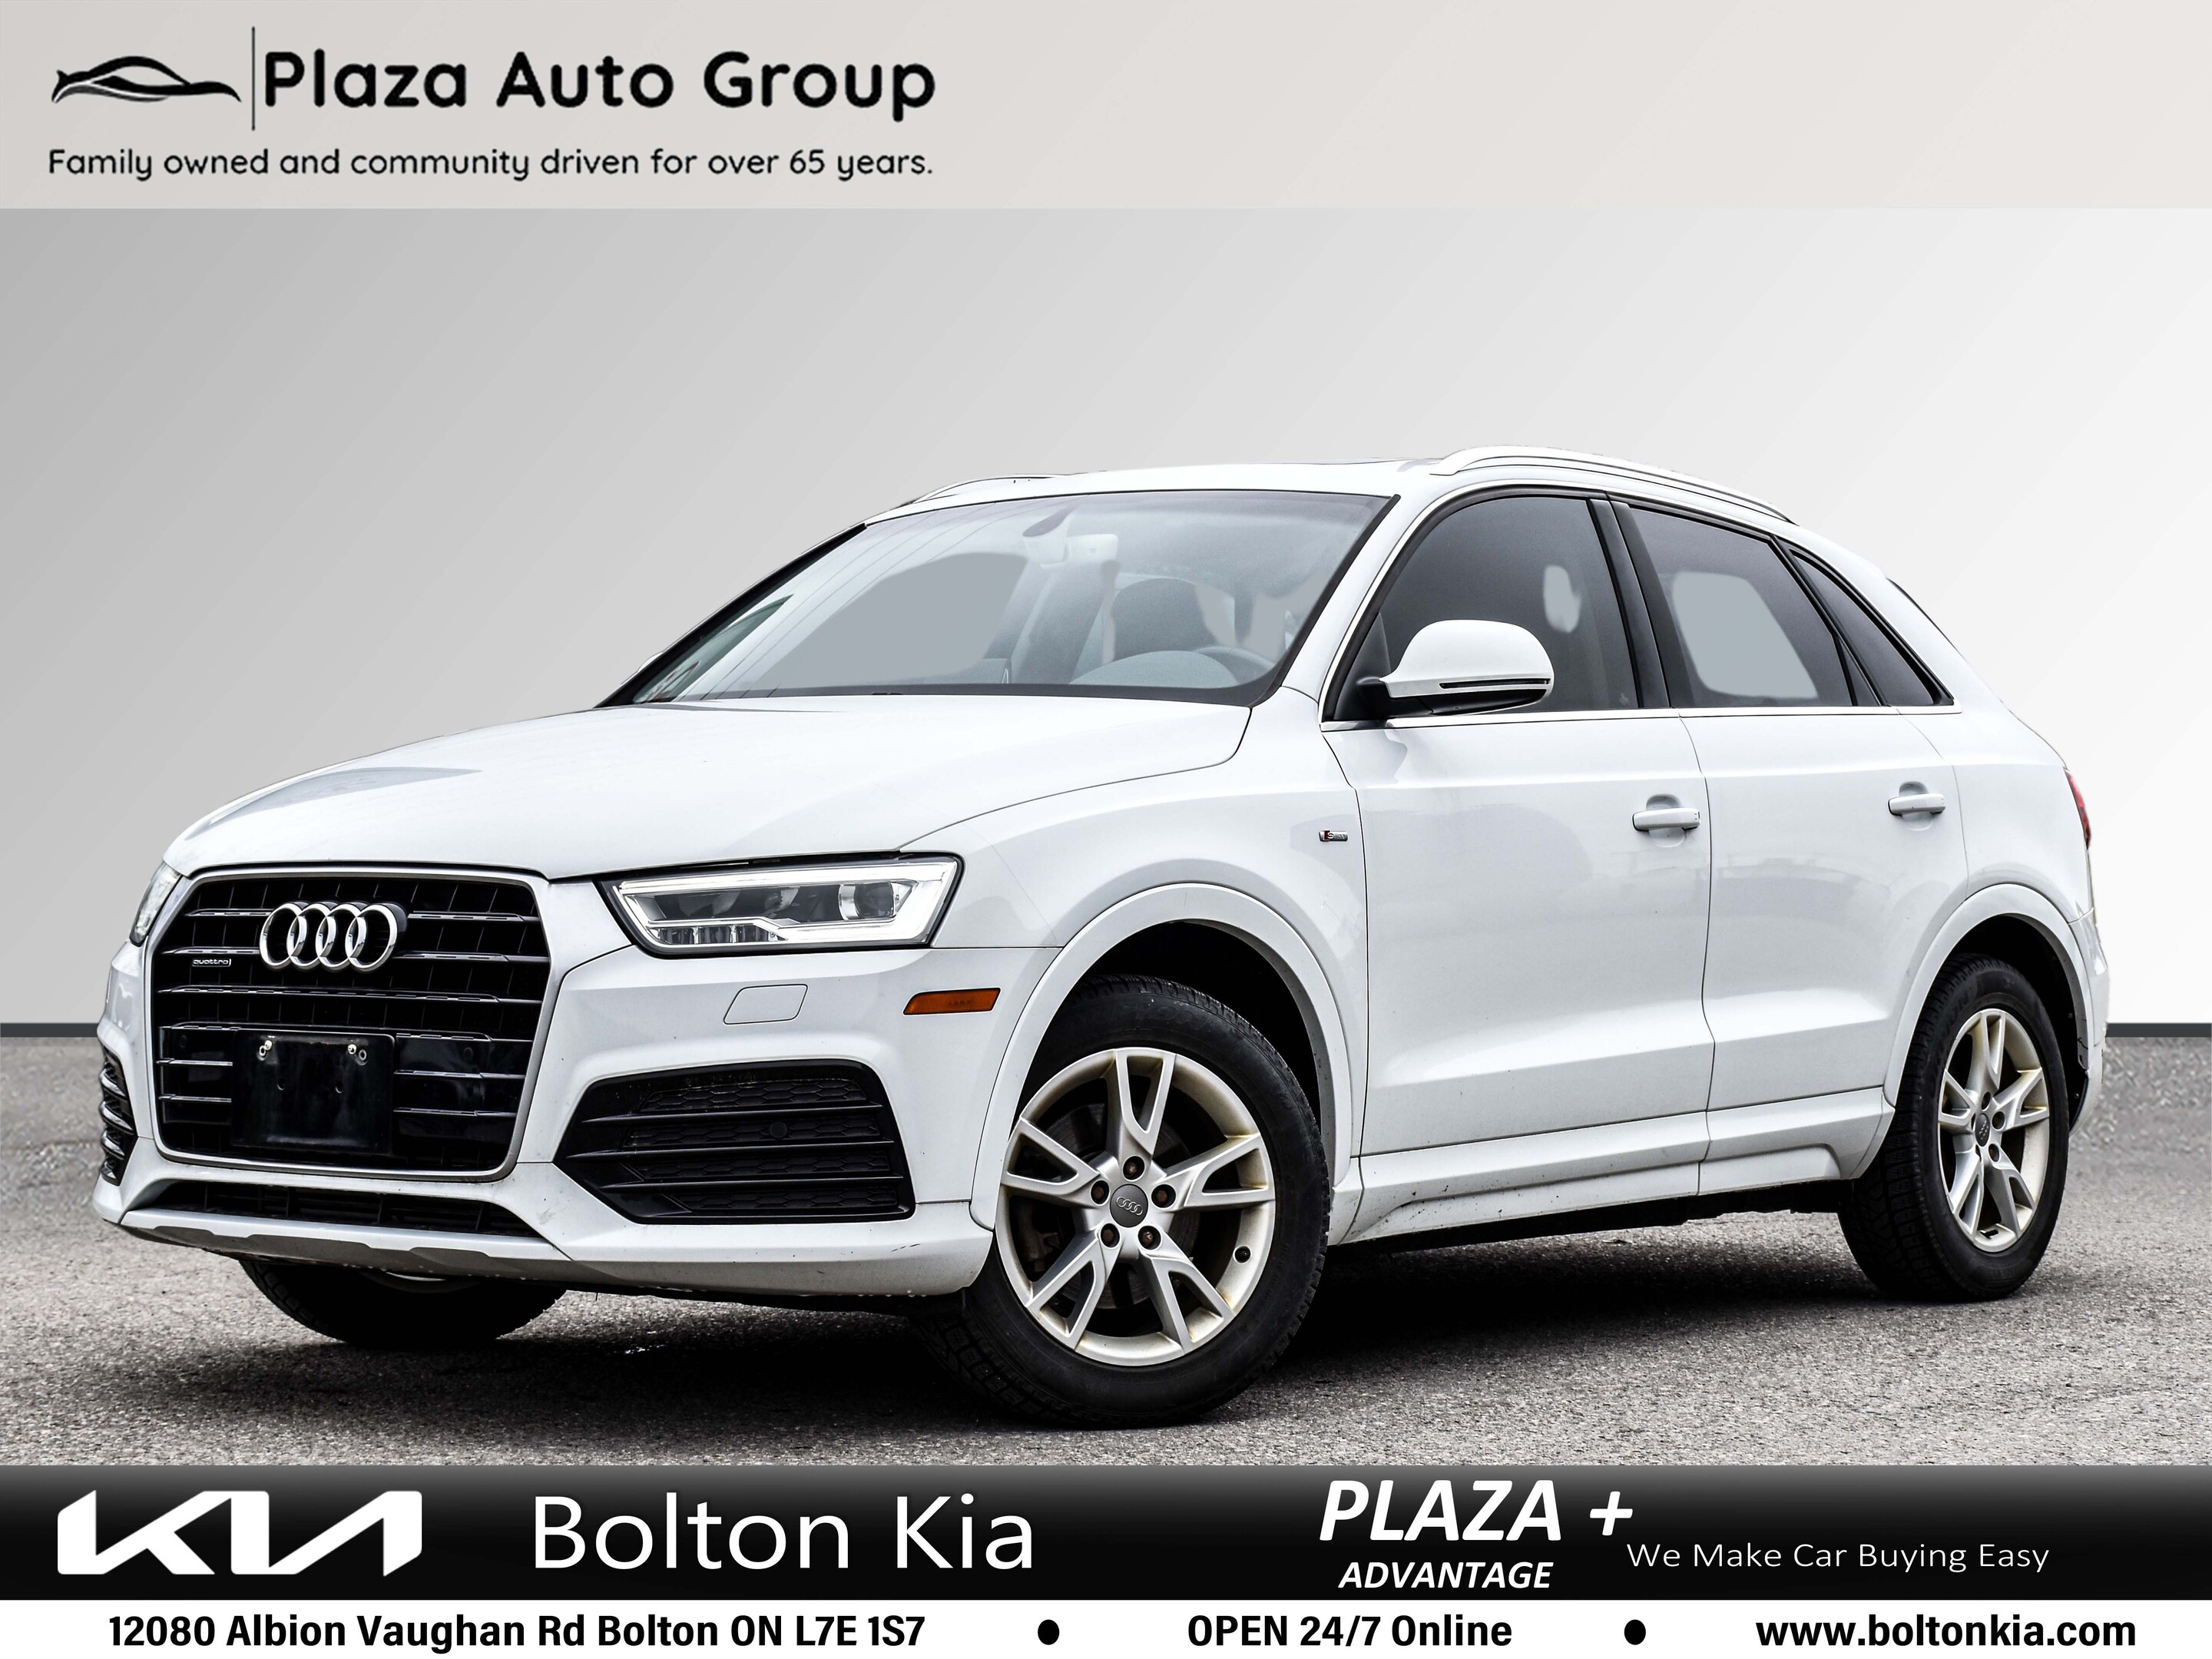 2016 Audi Q3 $117 WEEKLY* CLEAN UNIT HEATED SEATS LEATHER